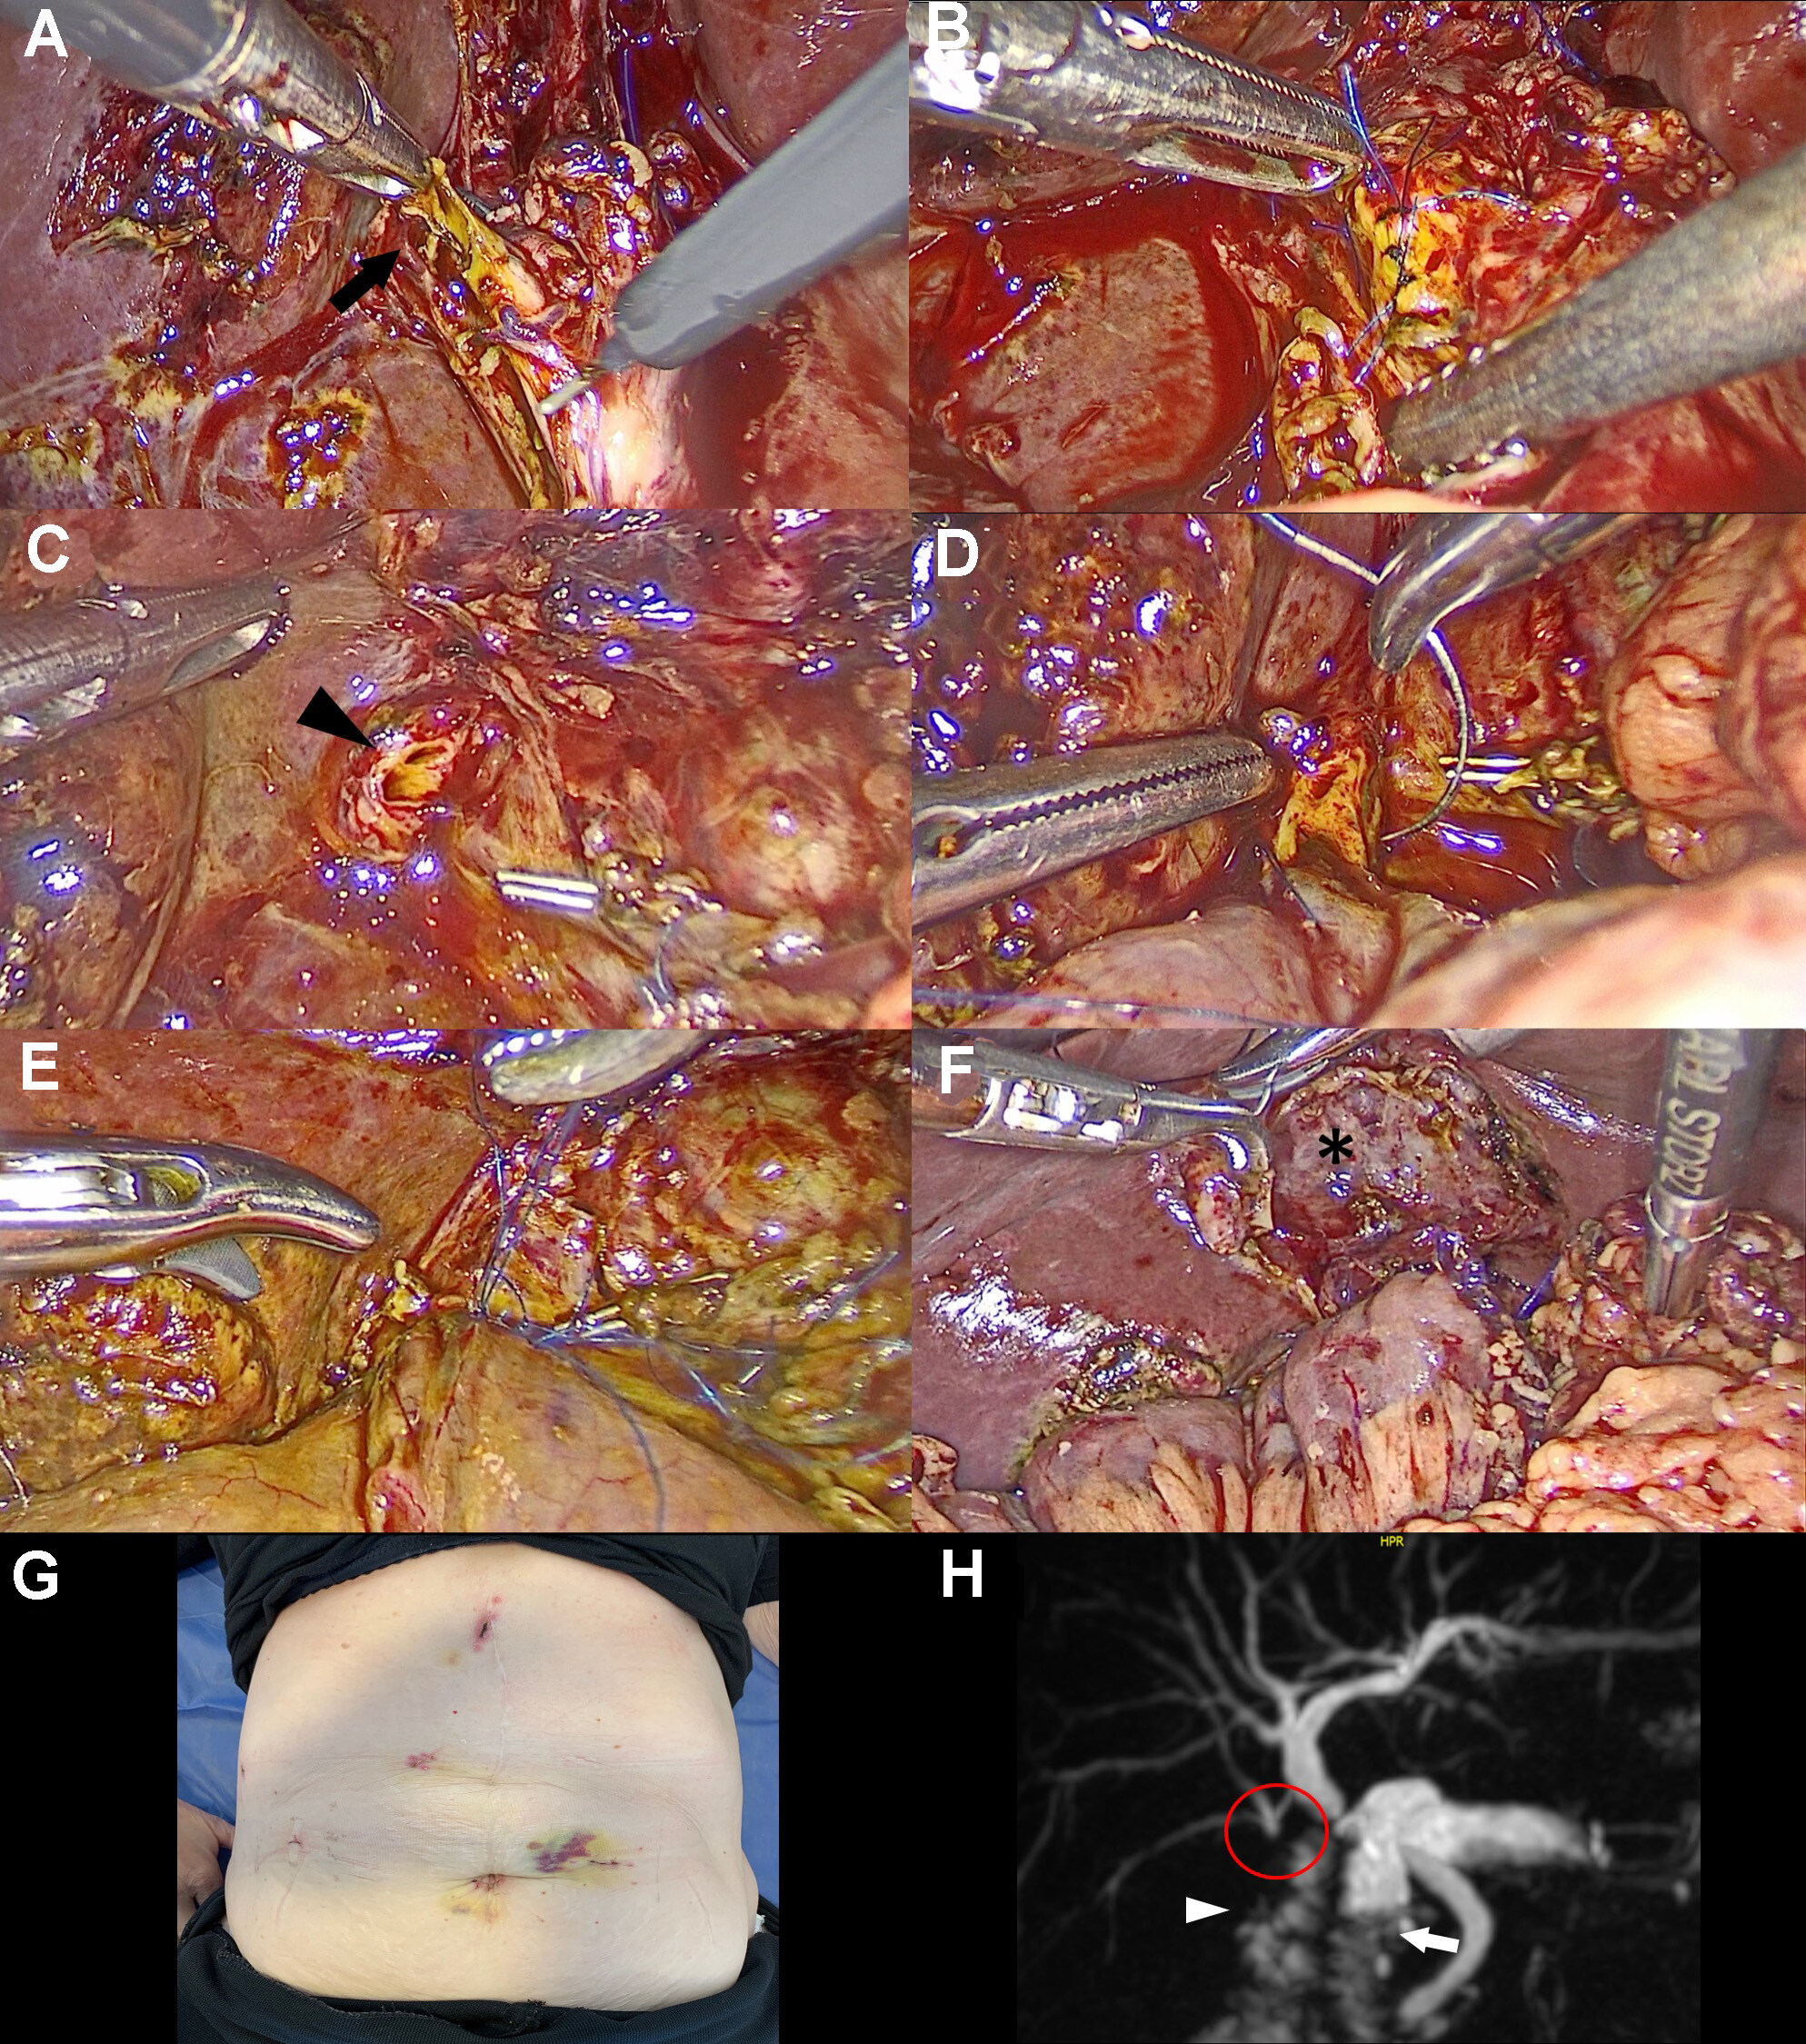 Laparoscopic hepaticojejunostomy for the treatment of bile duct injuries in difficult scenarios (with video)